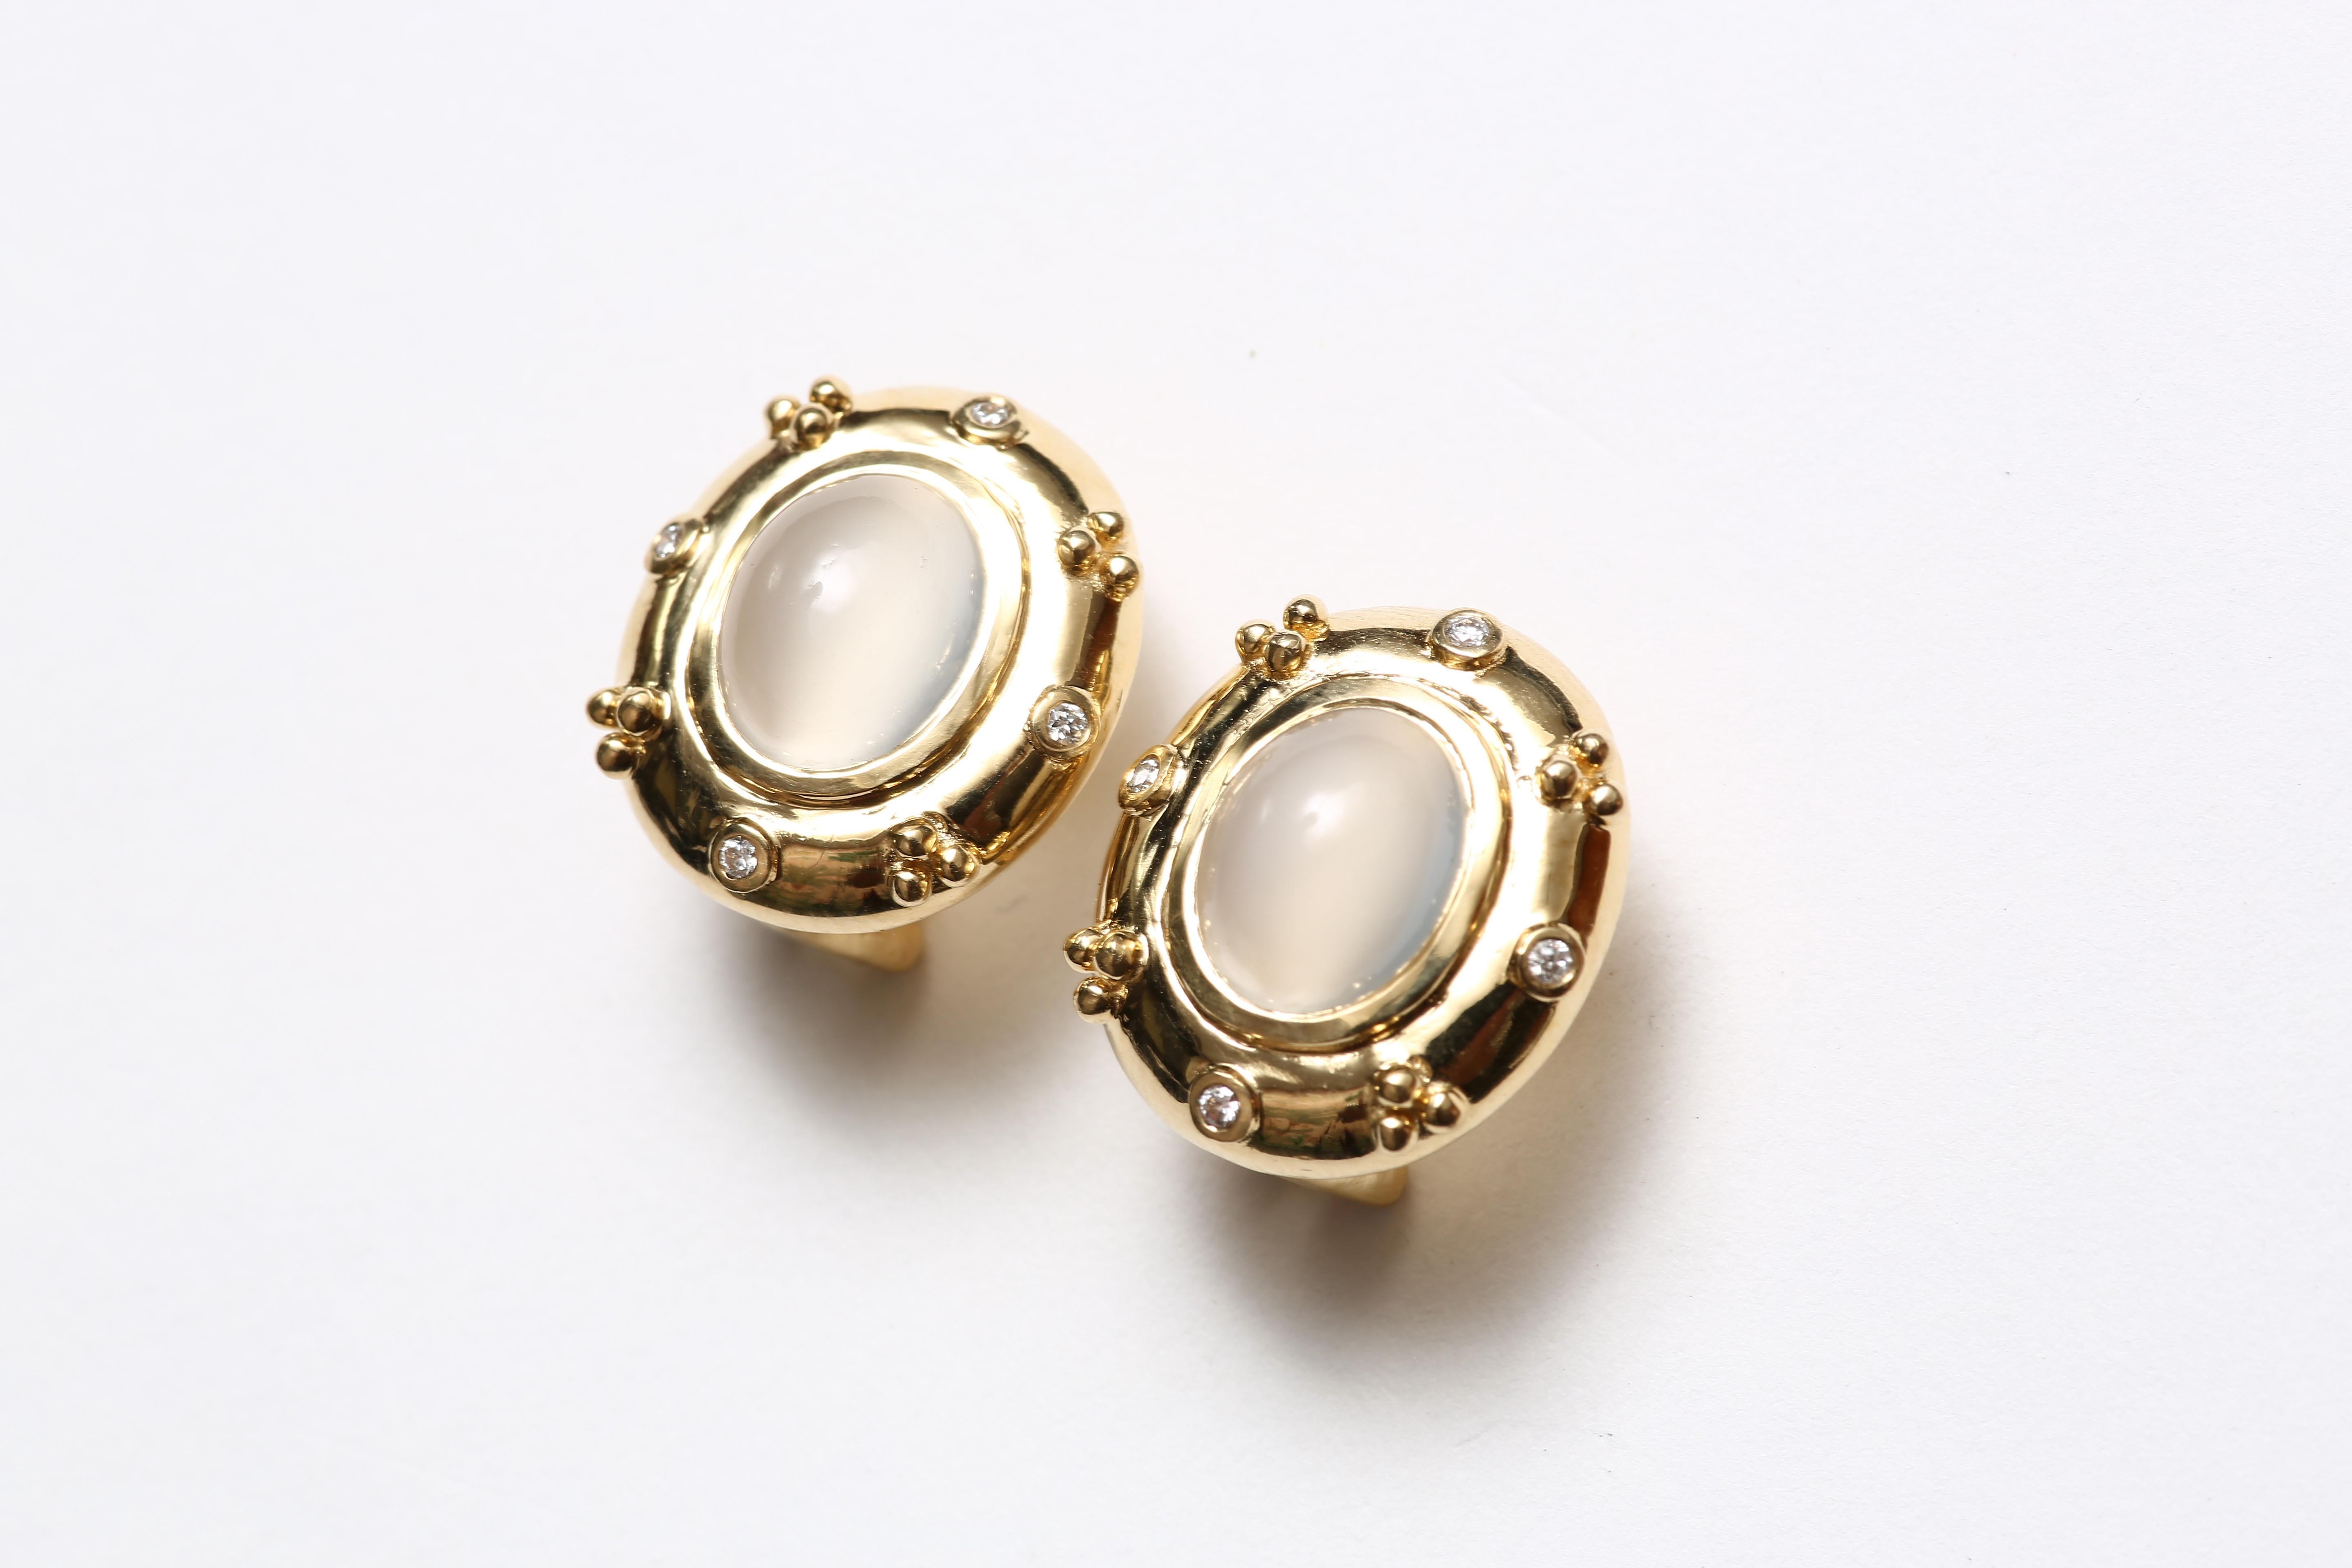 A lovely pair of earrings in solid 18 K gold decorated with small diamonds inset around oval cabachon moonstones. 

Designed by AMANDA CLARK for Altfield, our collection focuses on natures most lovely materials such as pearls, amber, turquoise,